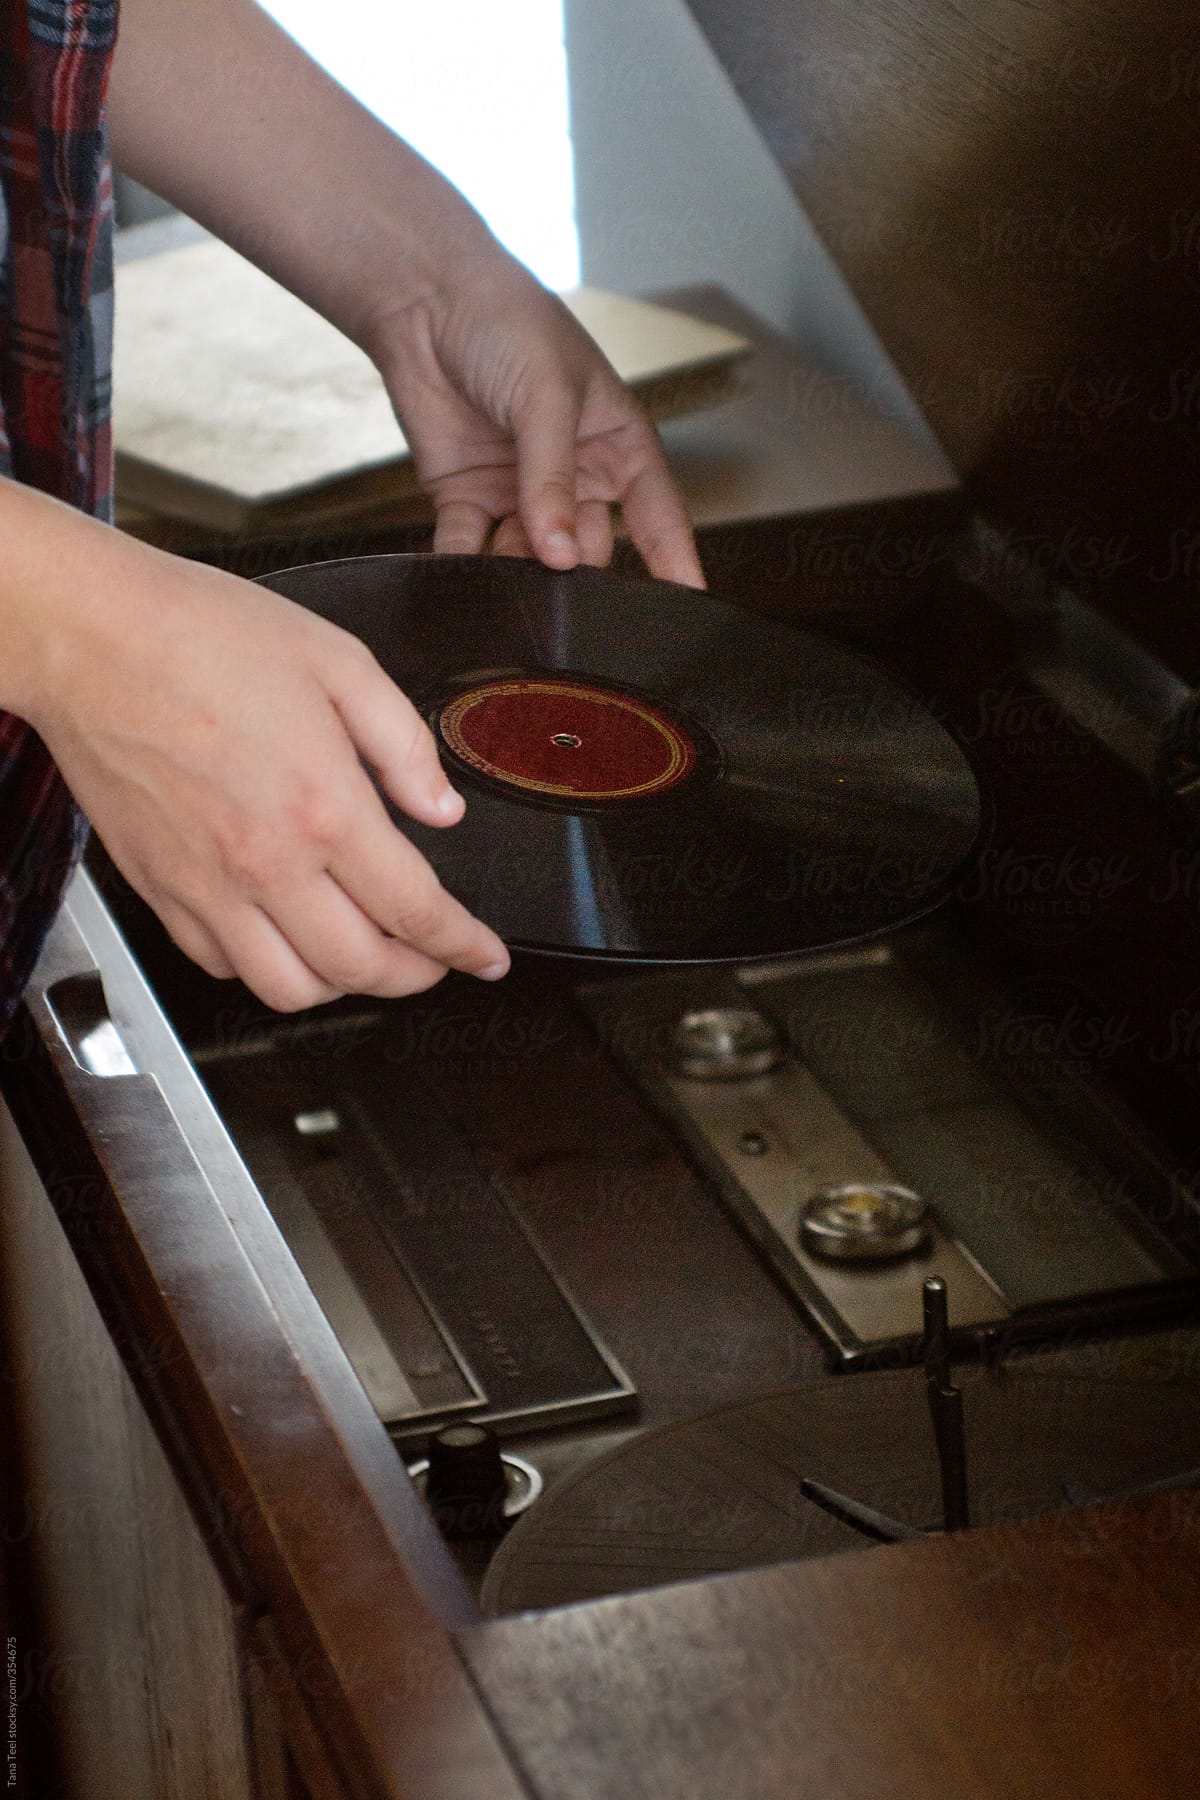 Teen places vinyl 78 record onto turntable in old record player cabinet